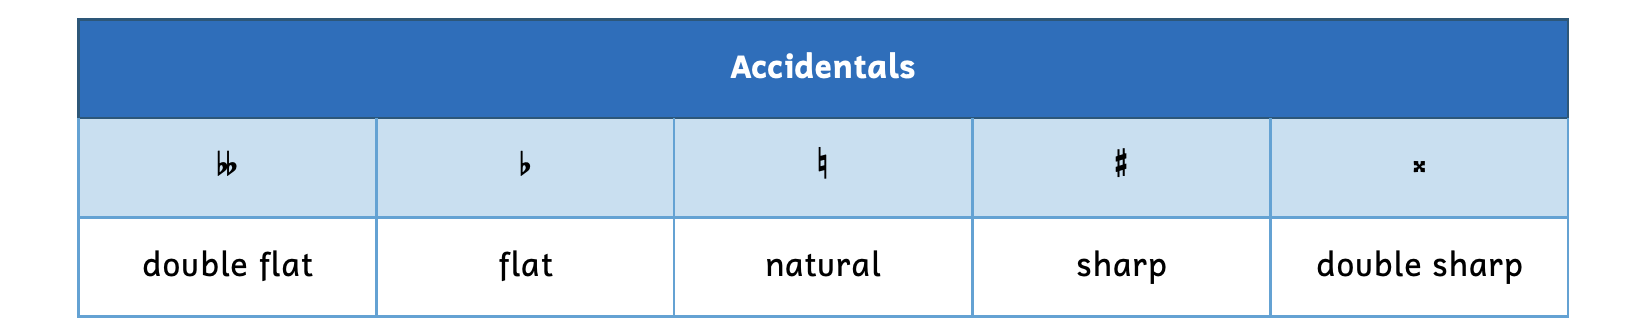 Table showing the different types of accidentals, which are the double flat, the flat, the natural, the sharp, and the double sharp.